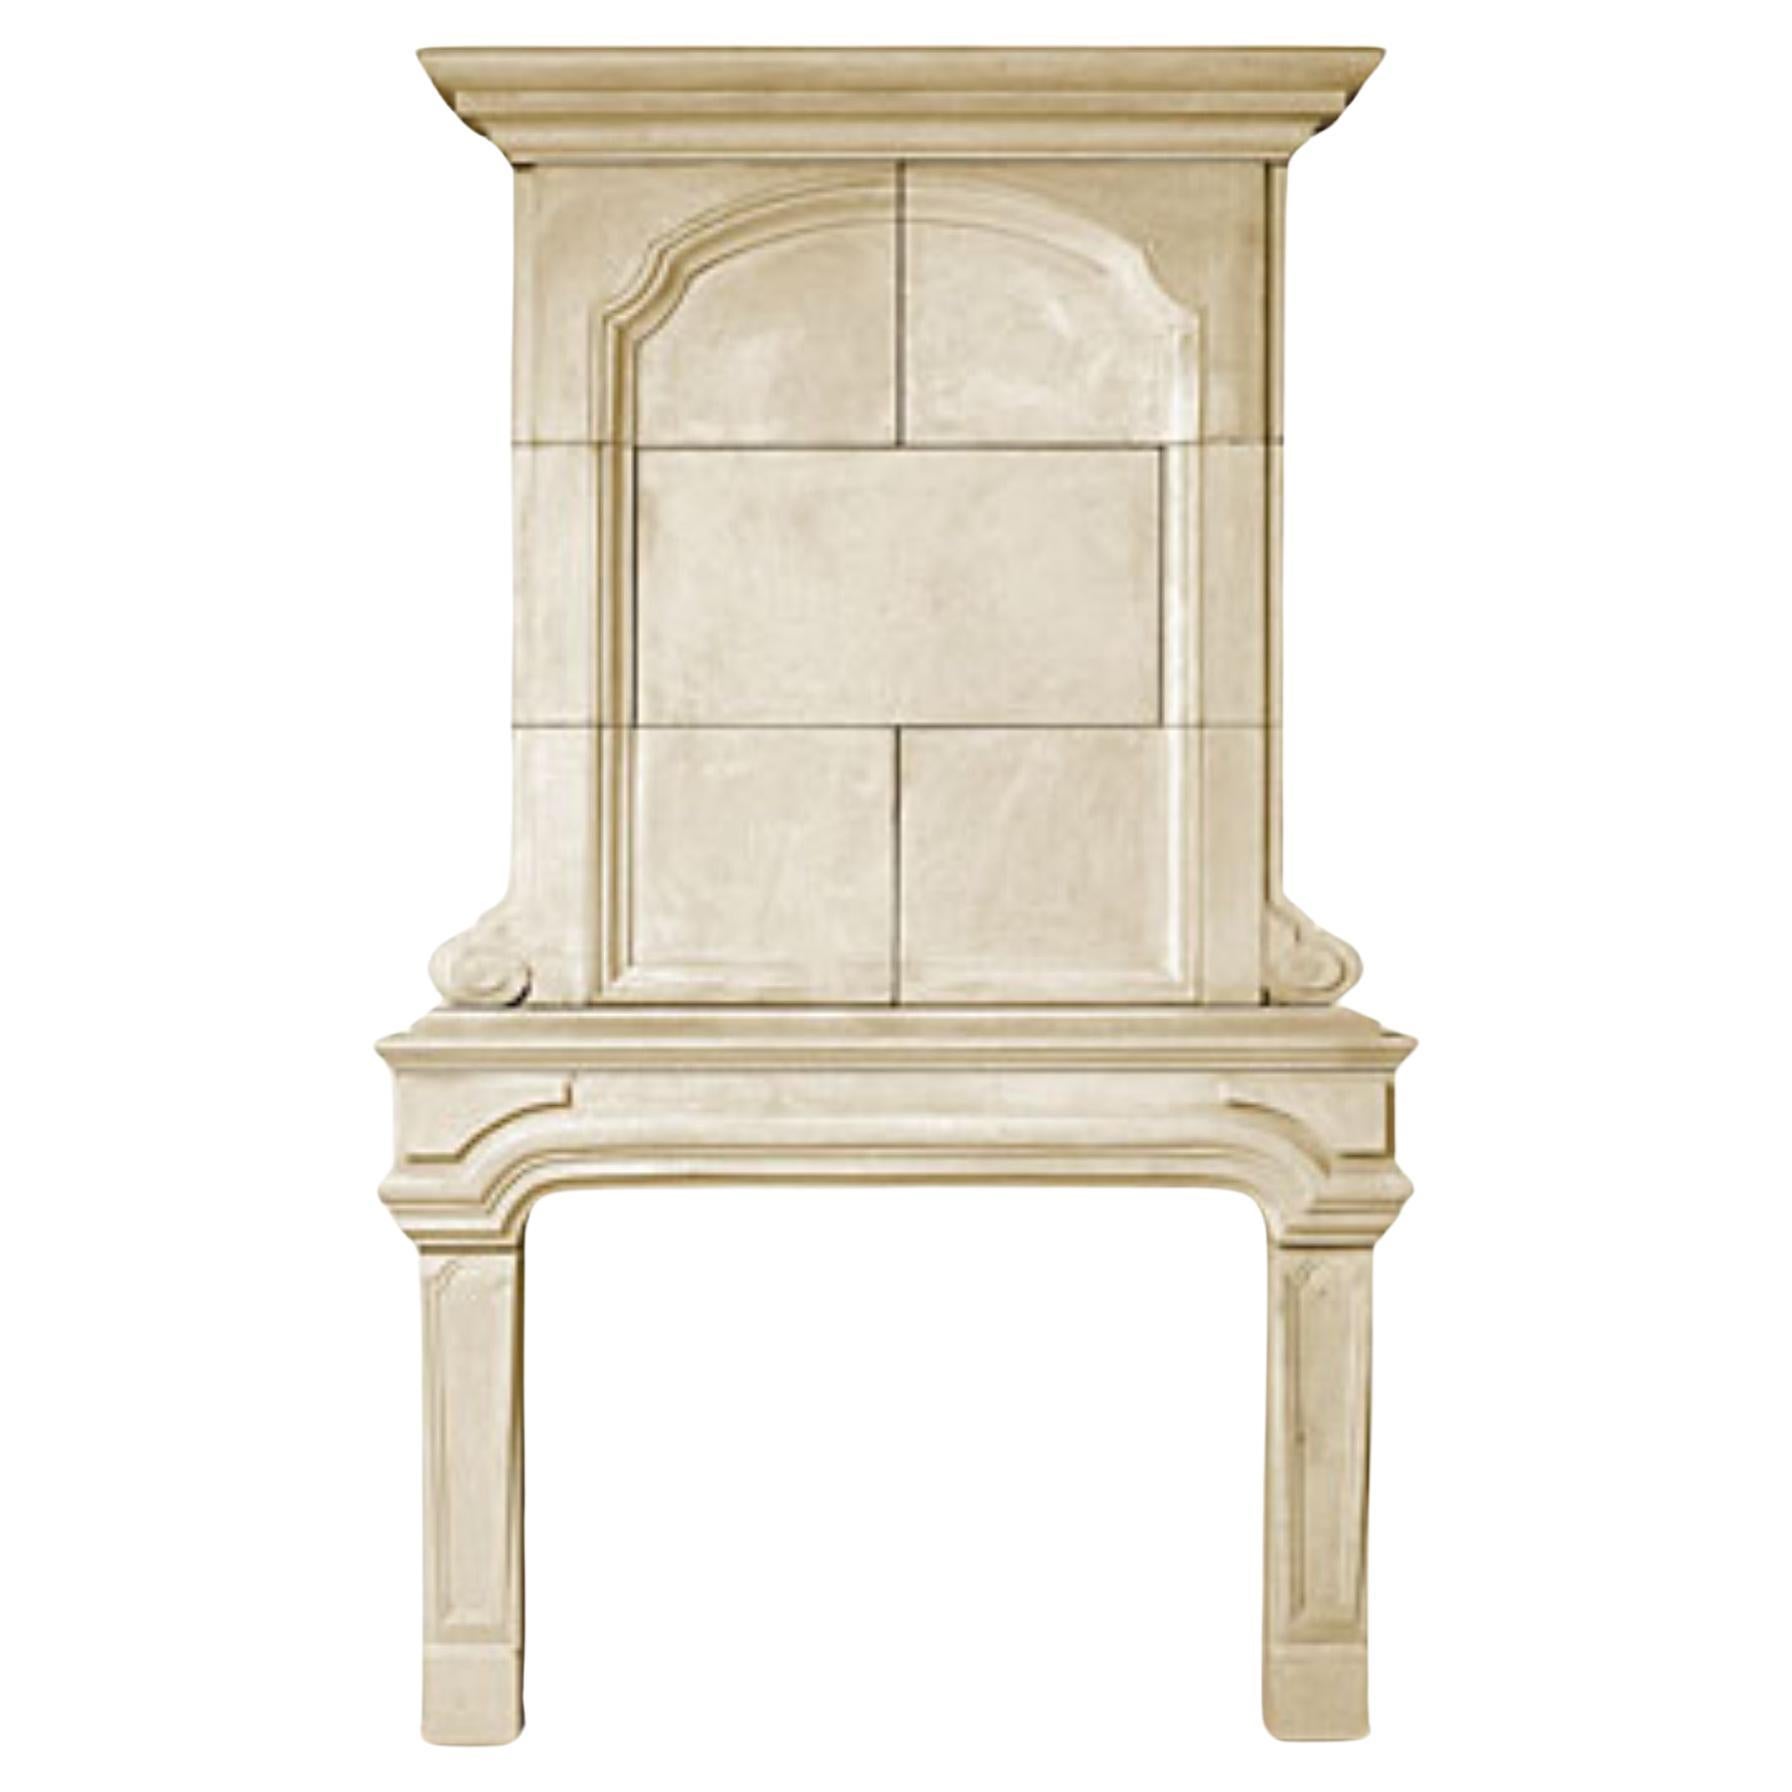 The Regency: A Classically-Inspired English Stone Fireplace with Overmantel  For Sale